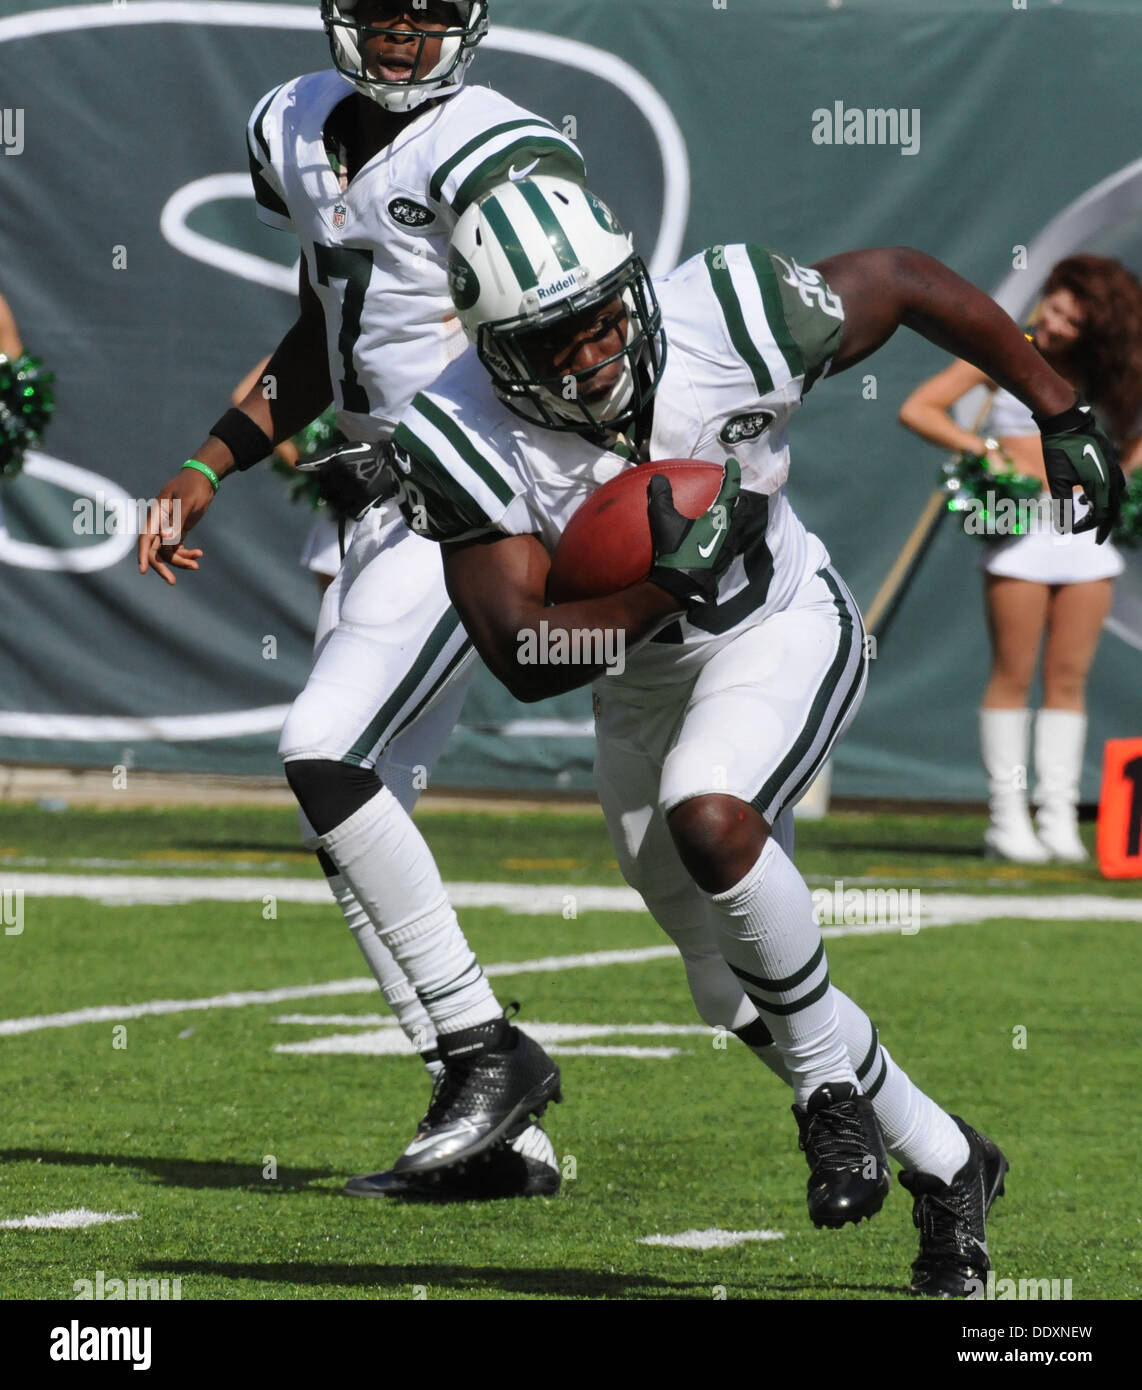 East Rutherford, New Jersey, USA. 8th Sep, 2013. New York Jets Bilal Powell  runs the ball. Tampa Bay over Buccaneers 18 to 17. Credit: Jeffrey  Geller/ZUMA Wire/ZUMAPRESS.com/Alamy Live News Stock Photo -